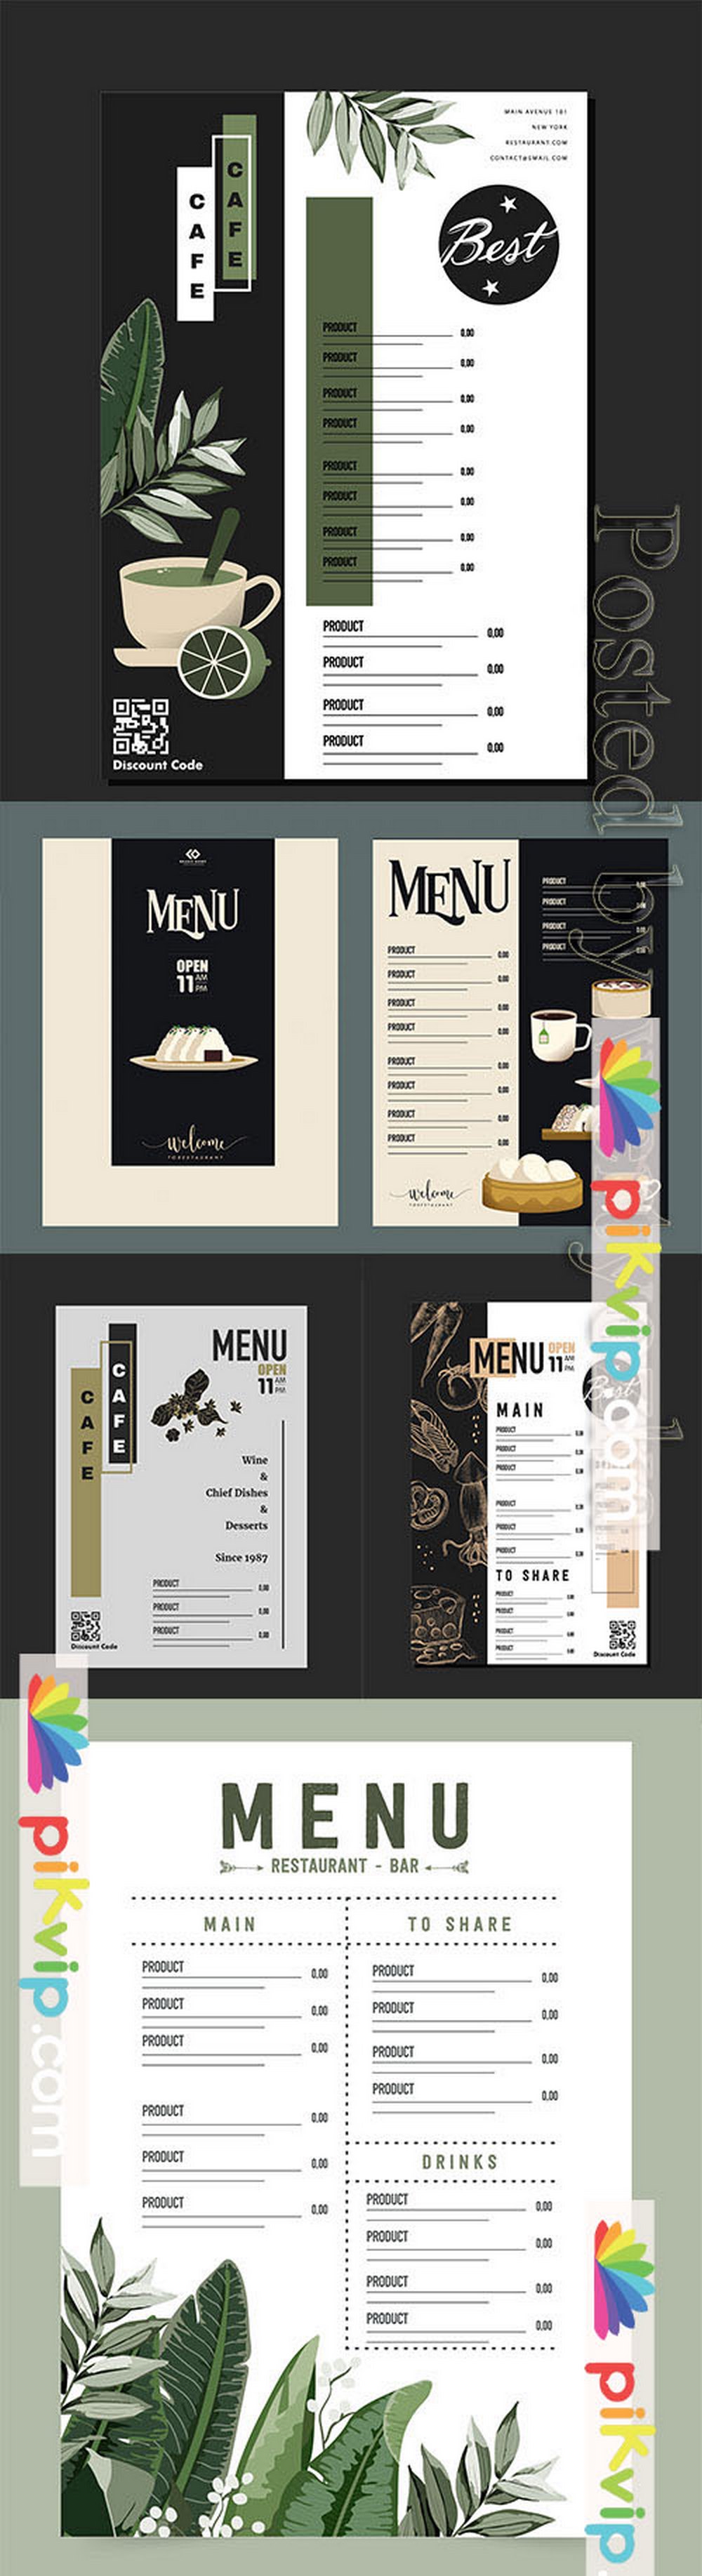 Menu For A Cafe And Restaurant With A Beautiful Design In Vector